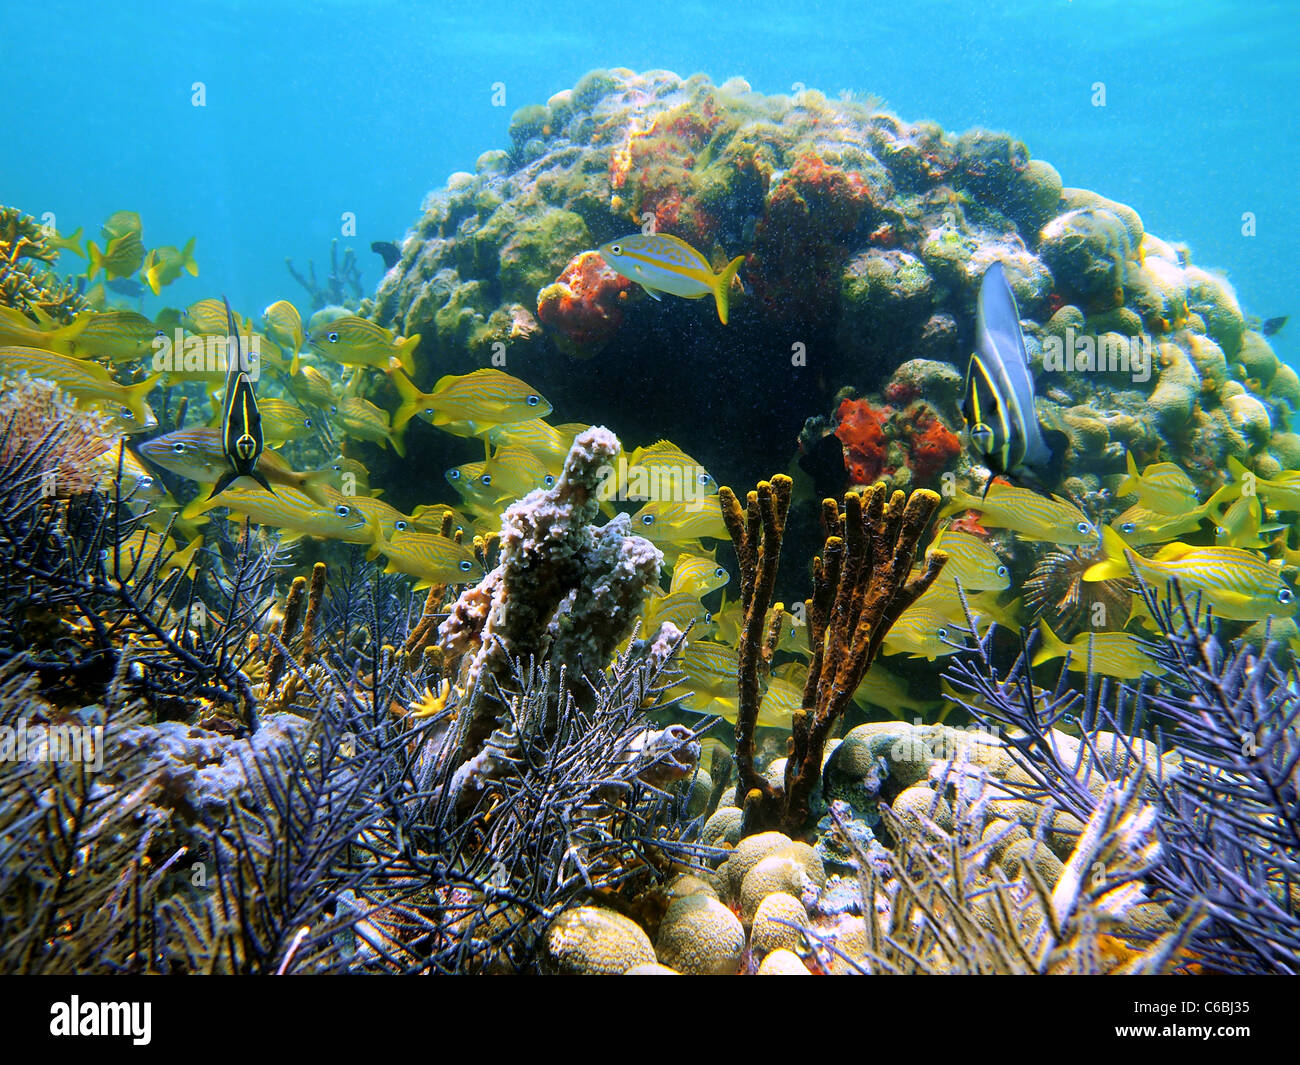 Coral reef with sponges and a school of tropical fish in the Caribbean sea, Bocas del Toro, Panama, Central America Stock Photo